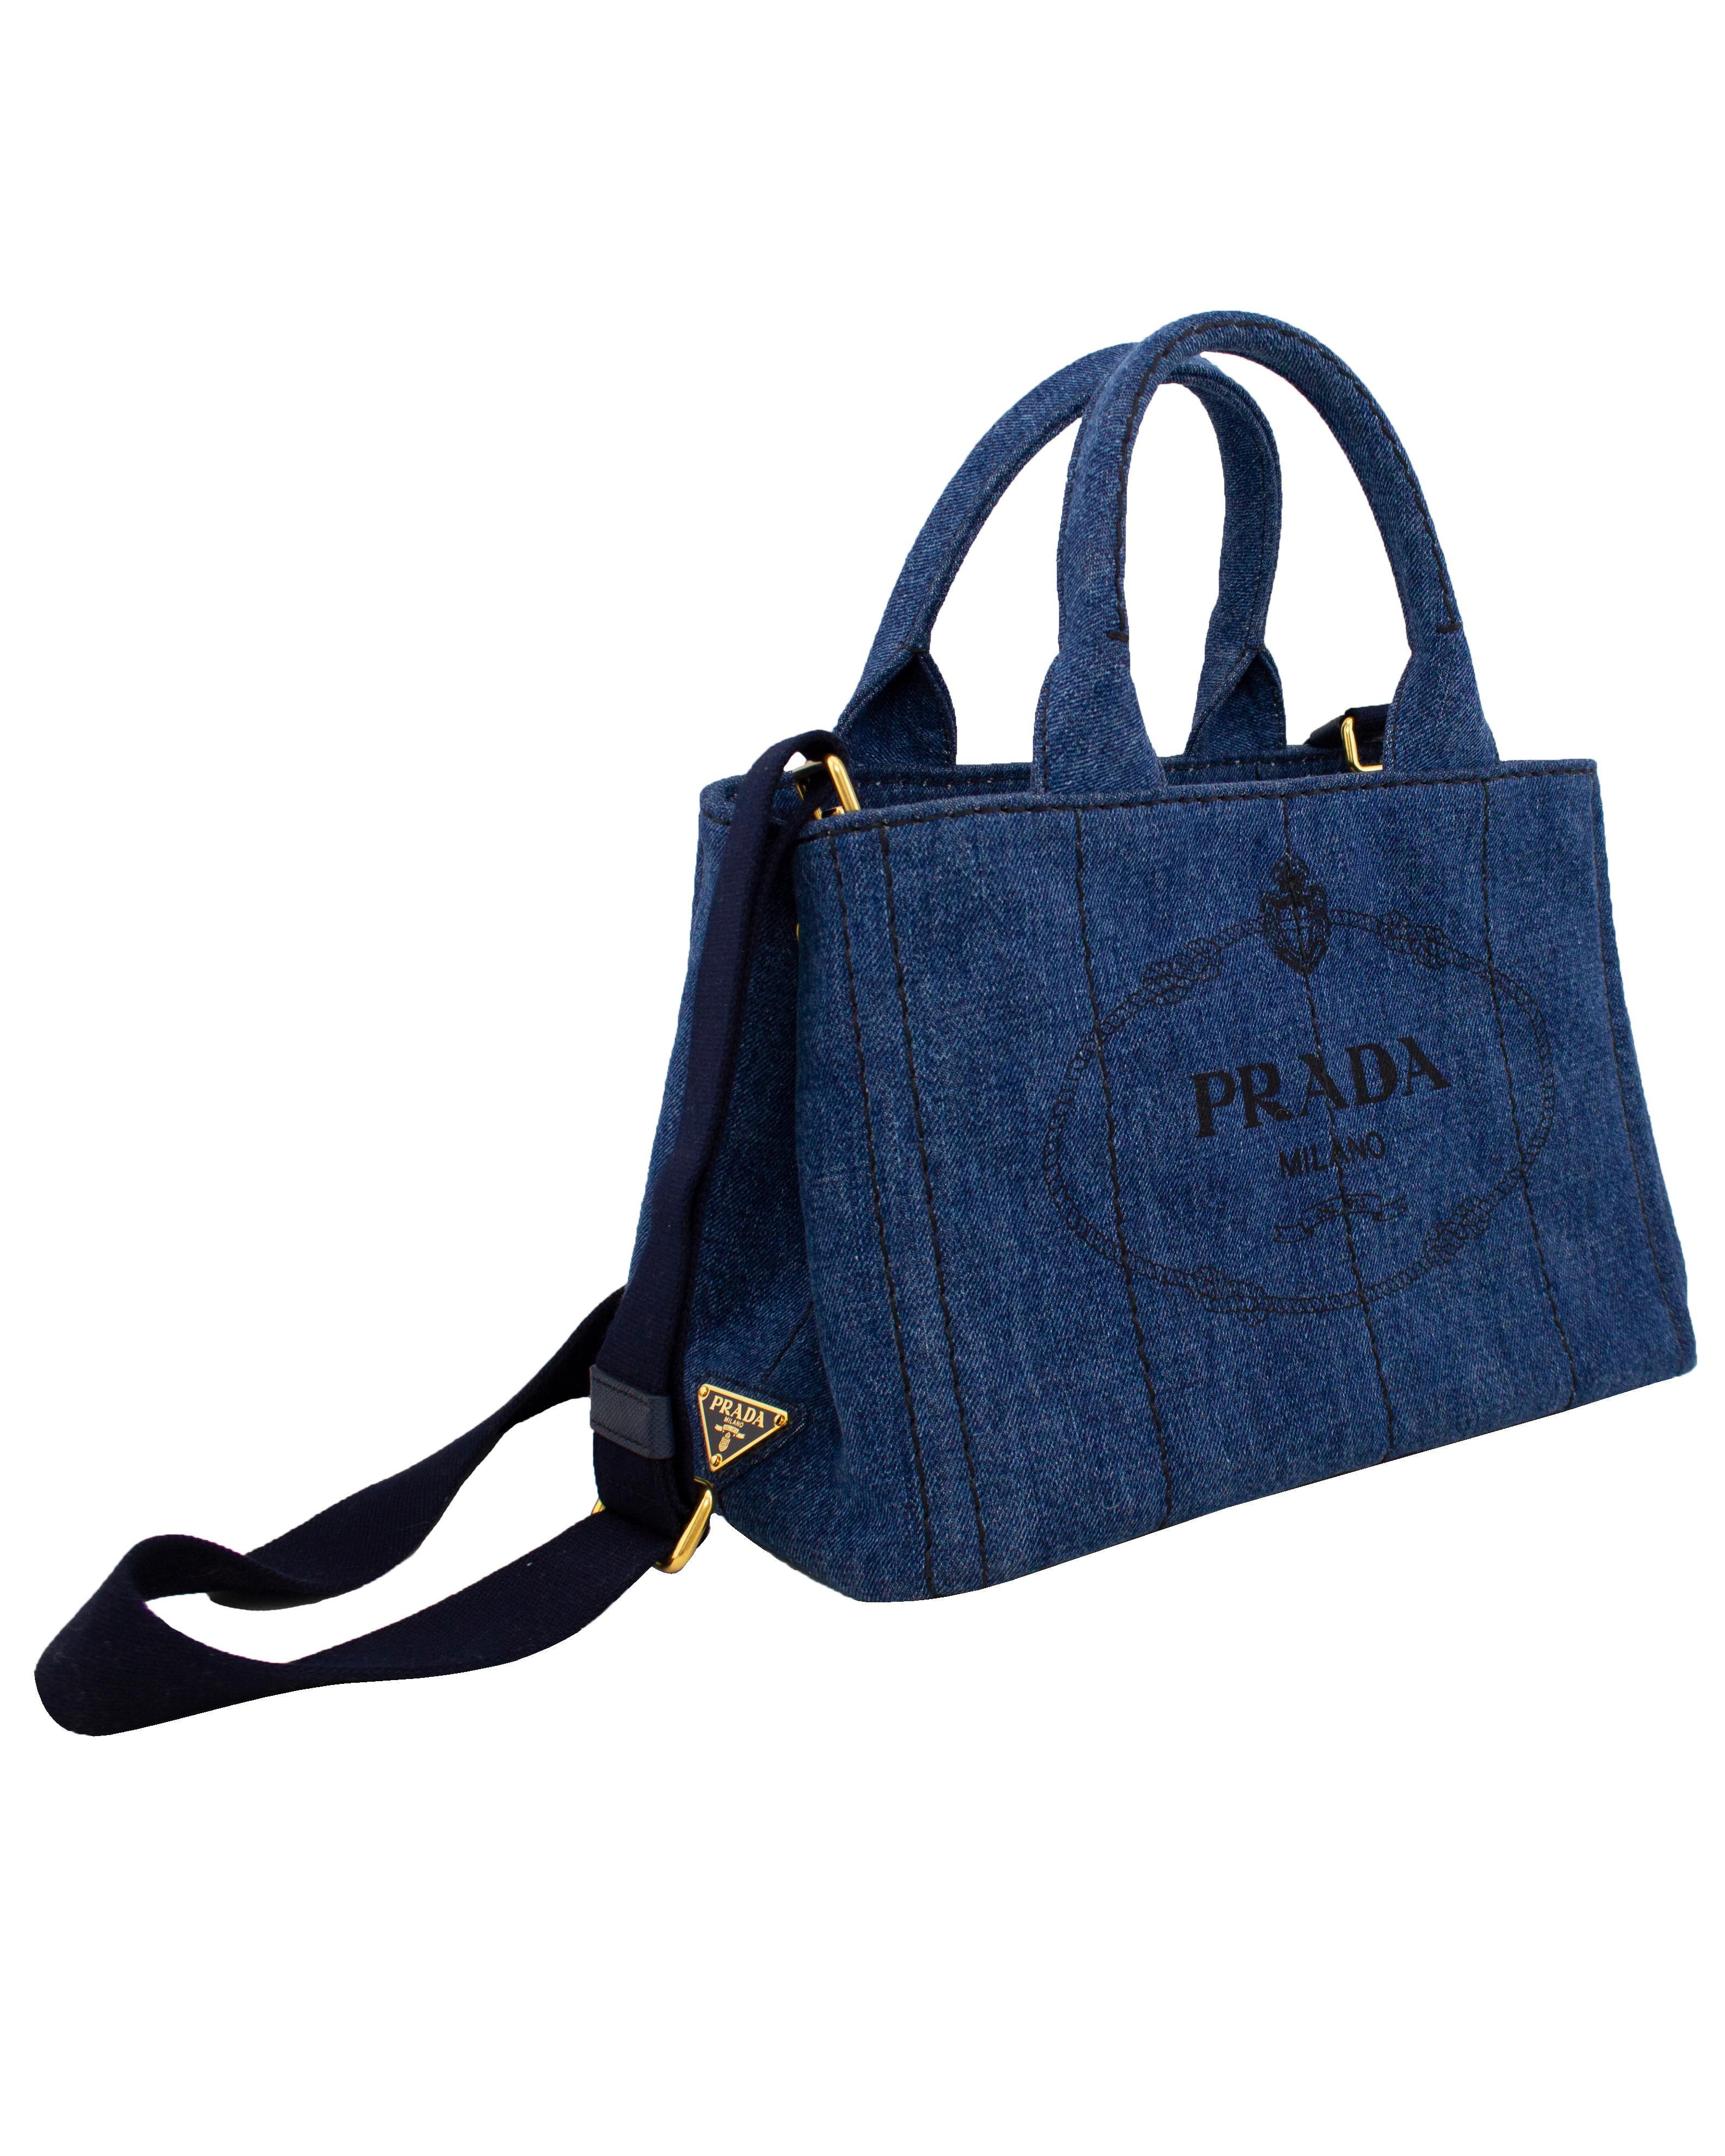  This current Prada tote bag was inspired by vintage gardener's bags. Denim printed with a silk-screen logo and embellished with brass-finish hardware, it offers three practical internal pockets and a detachable shoulder strap. Excellent vintage